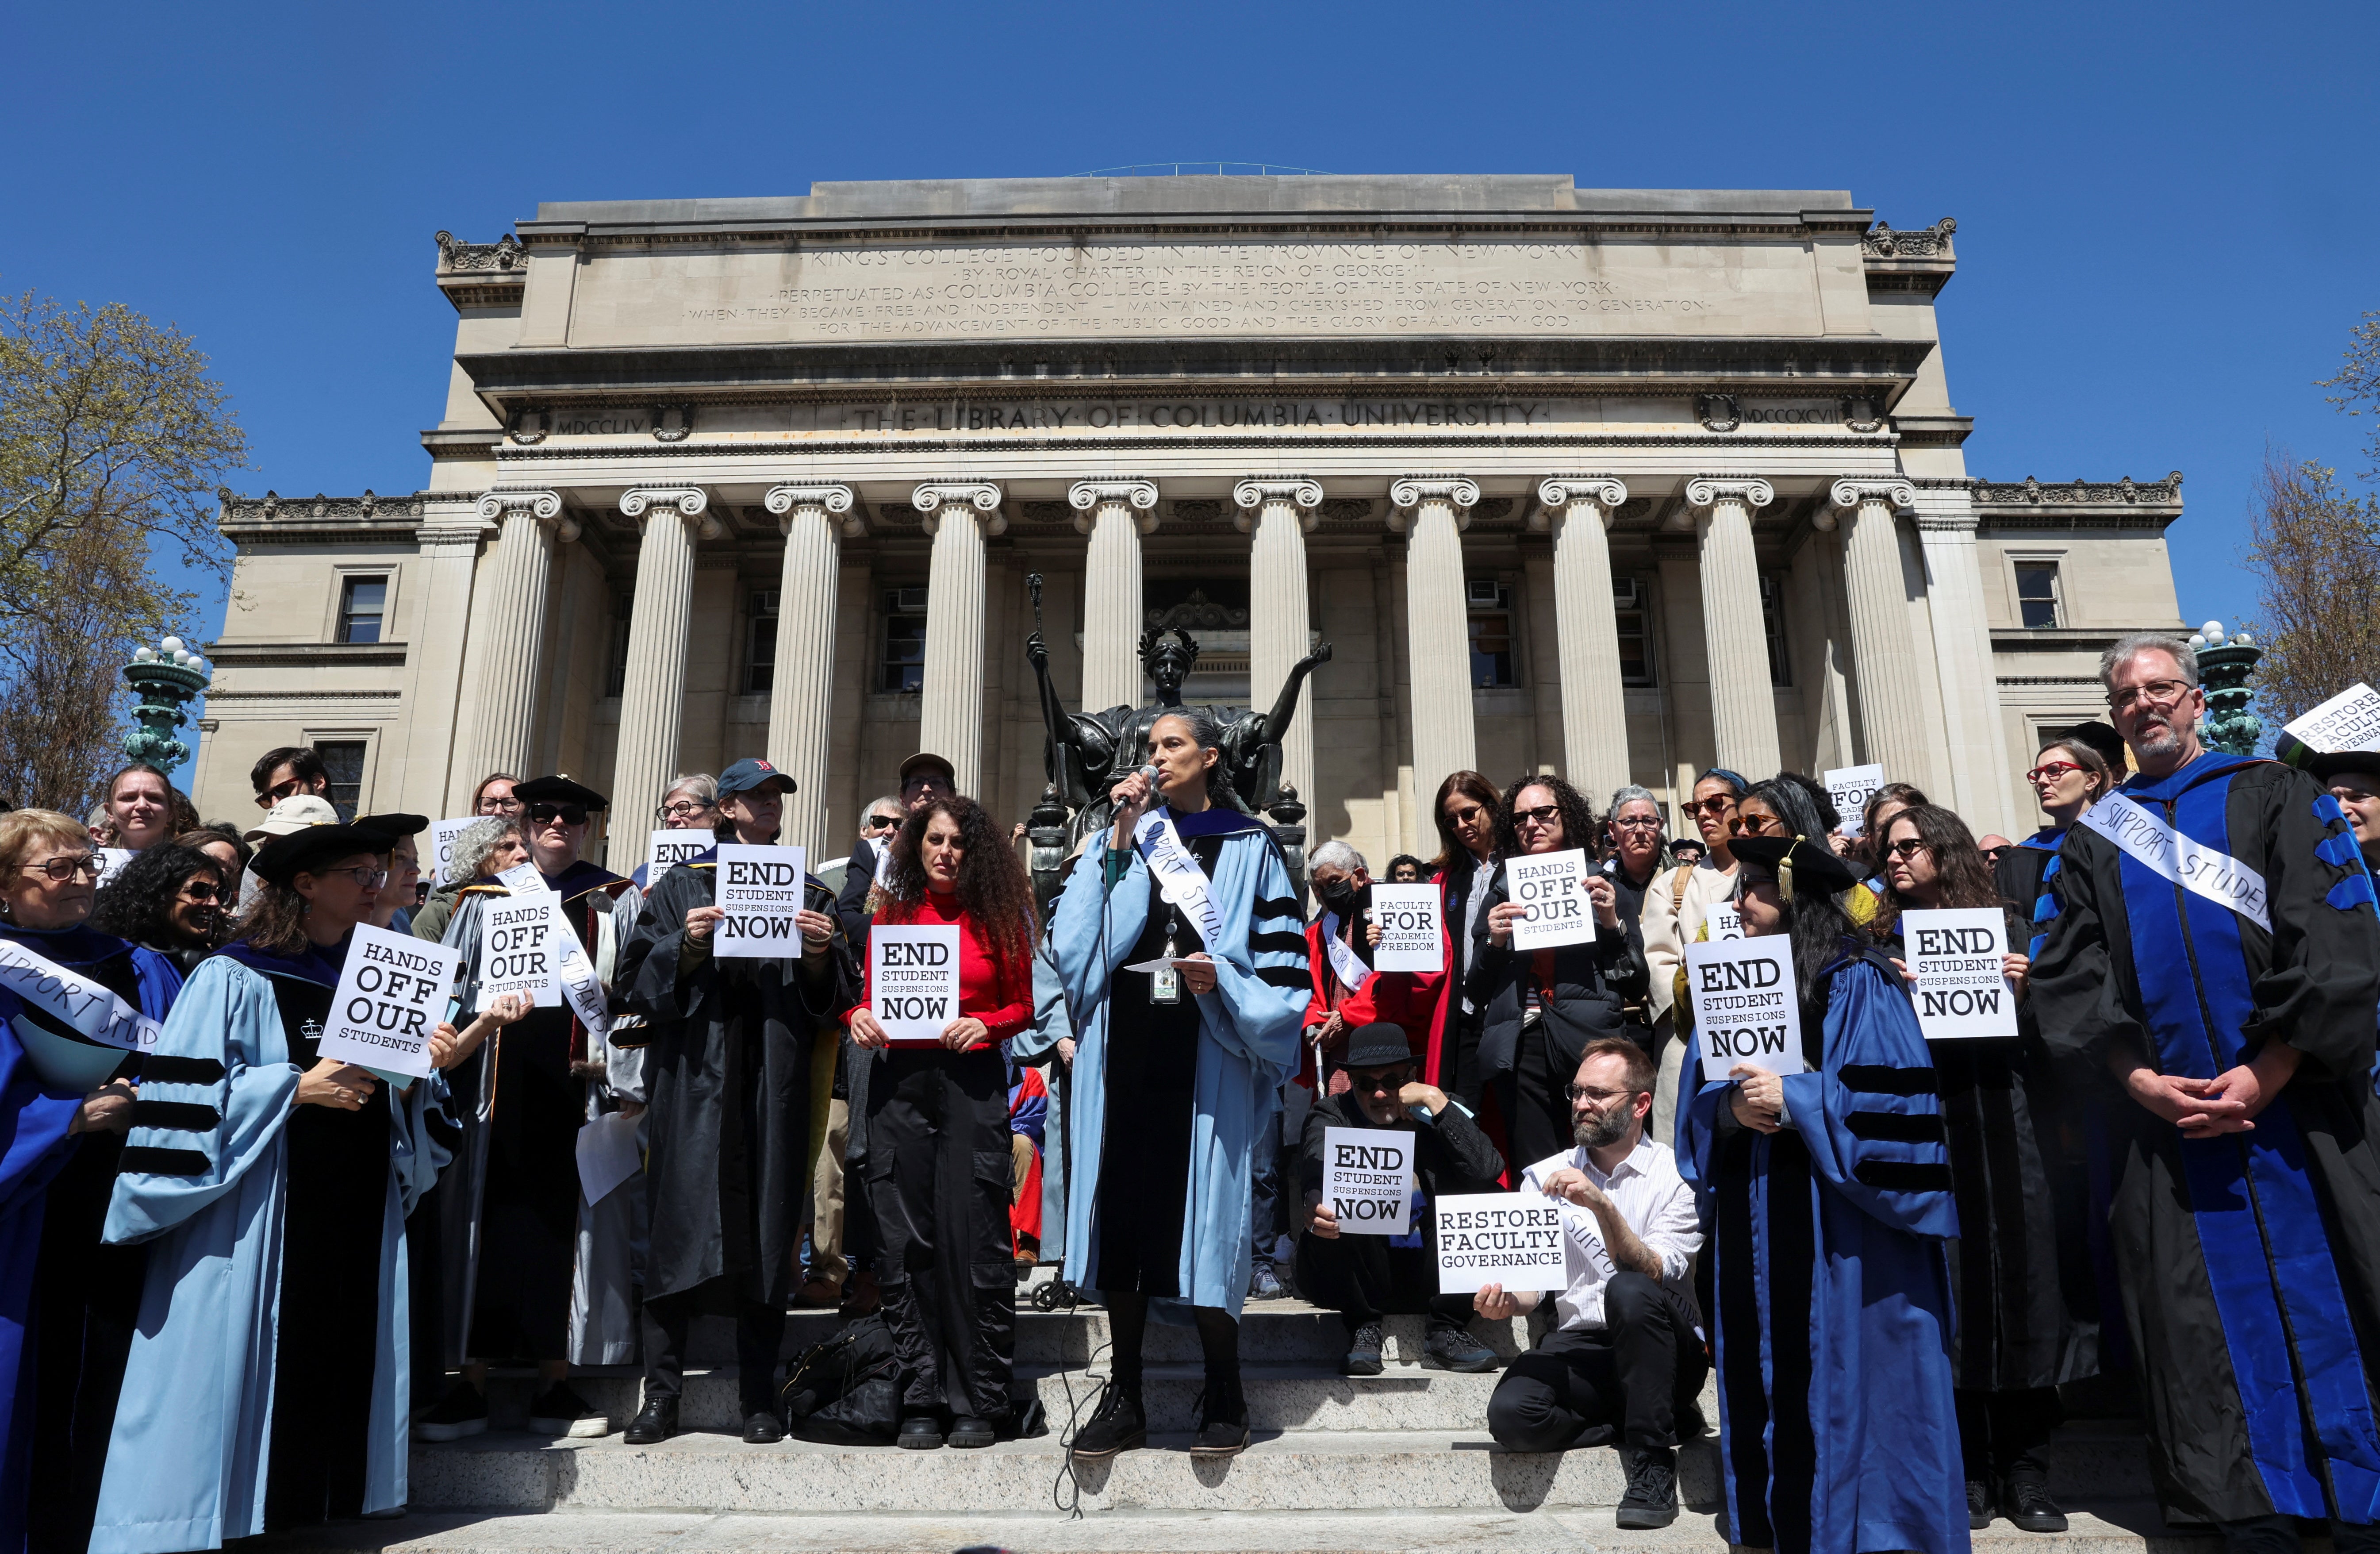 Columbia University faculty members staged a demonstration on Monday, pictured, condemning last week’s arrests of some 100 pro-Palestine student protesters